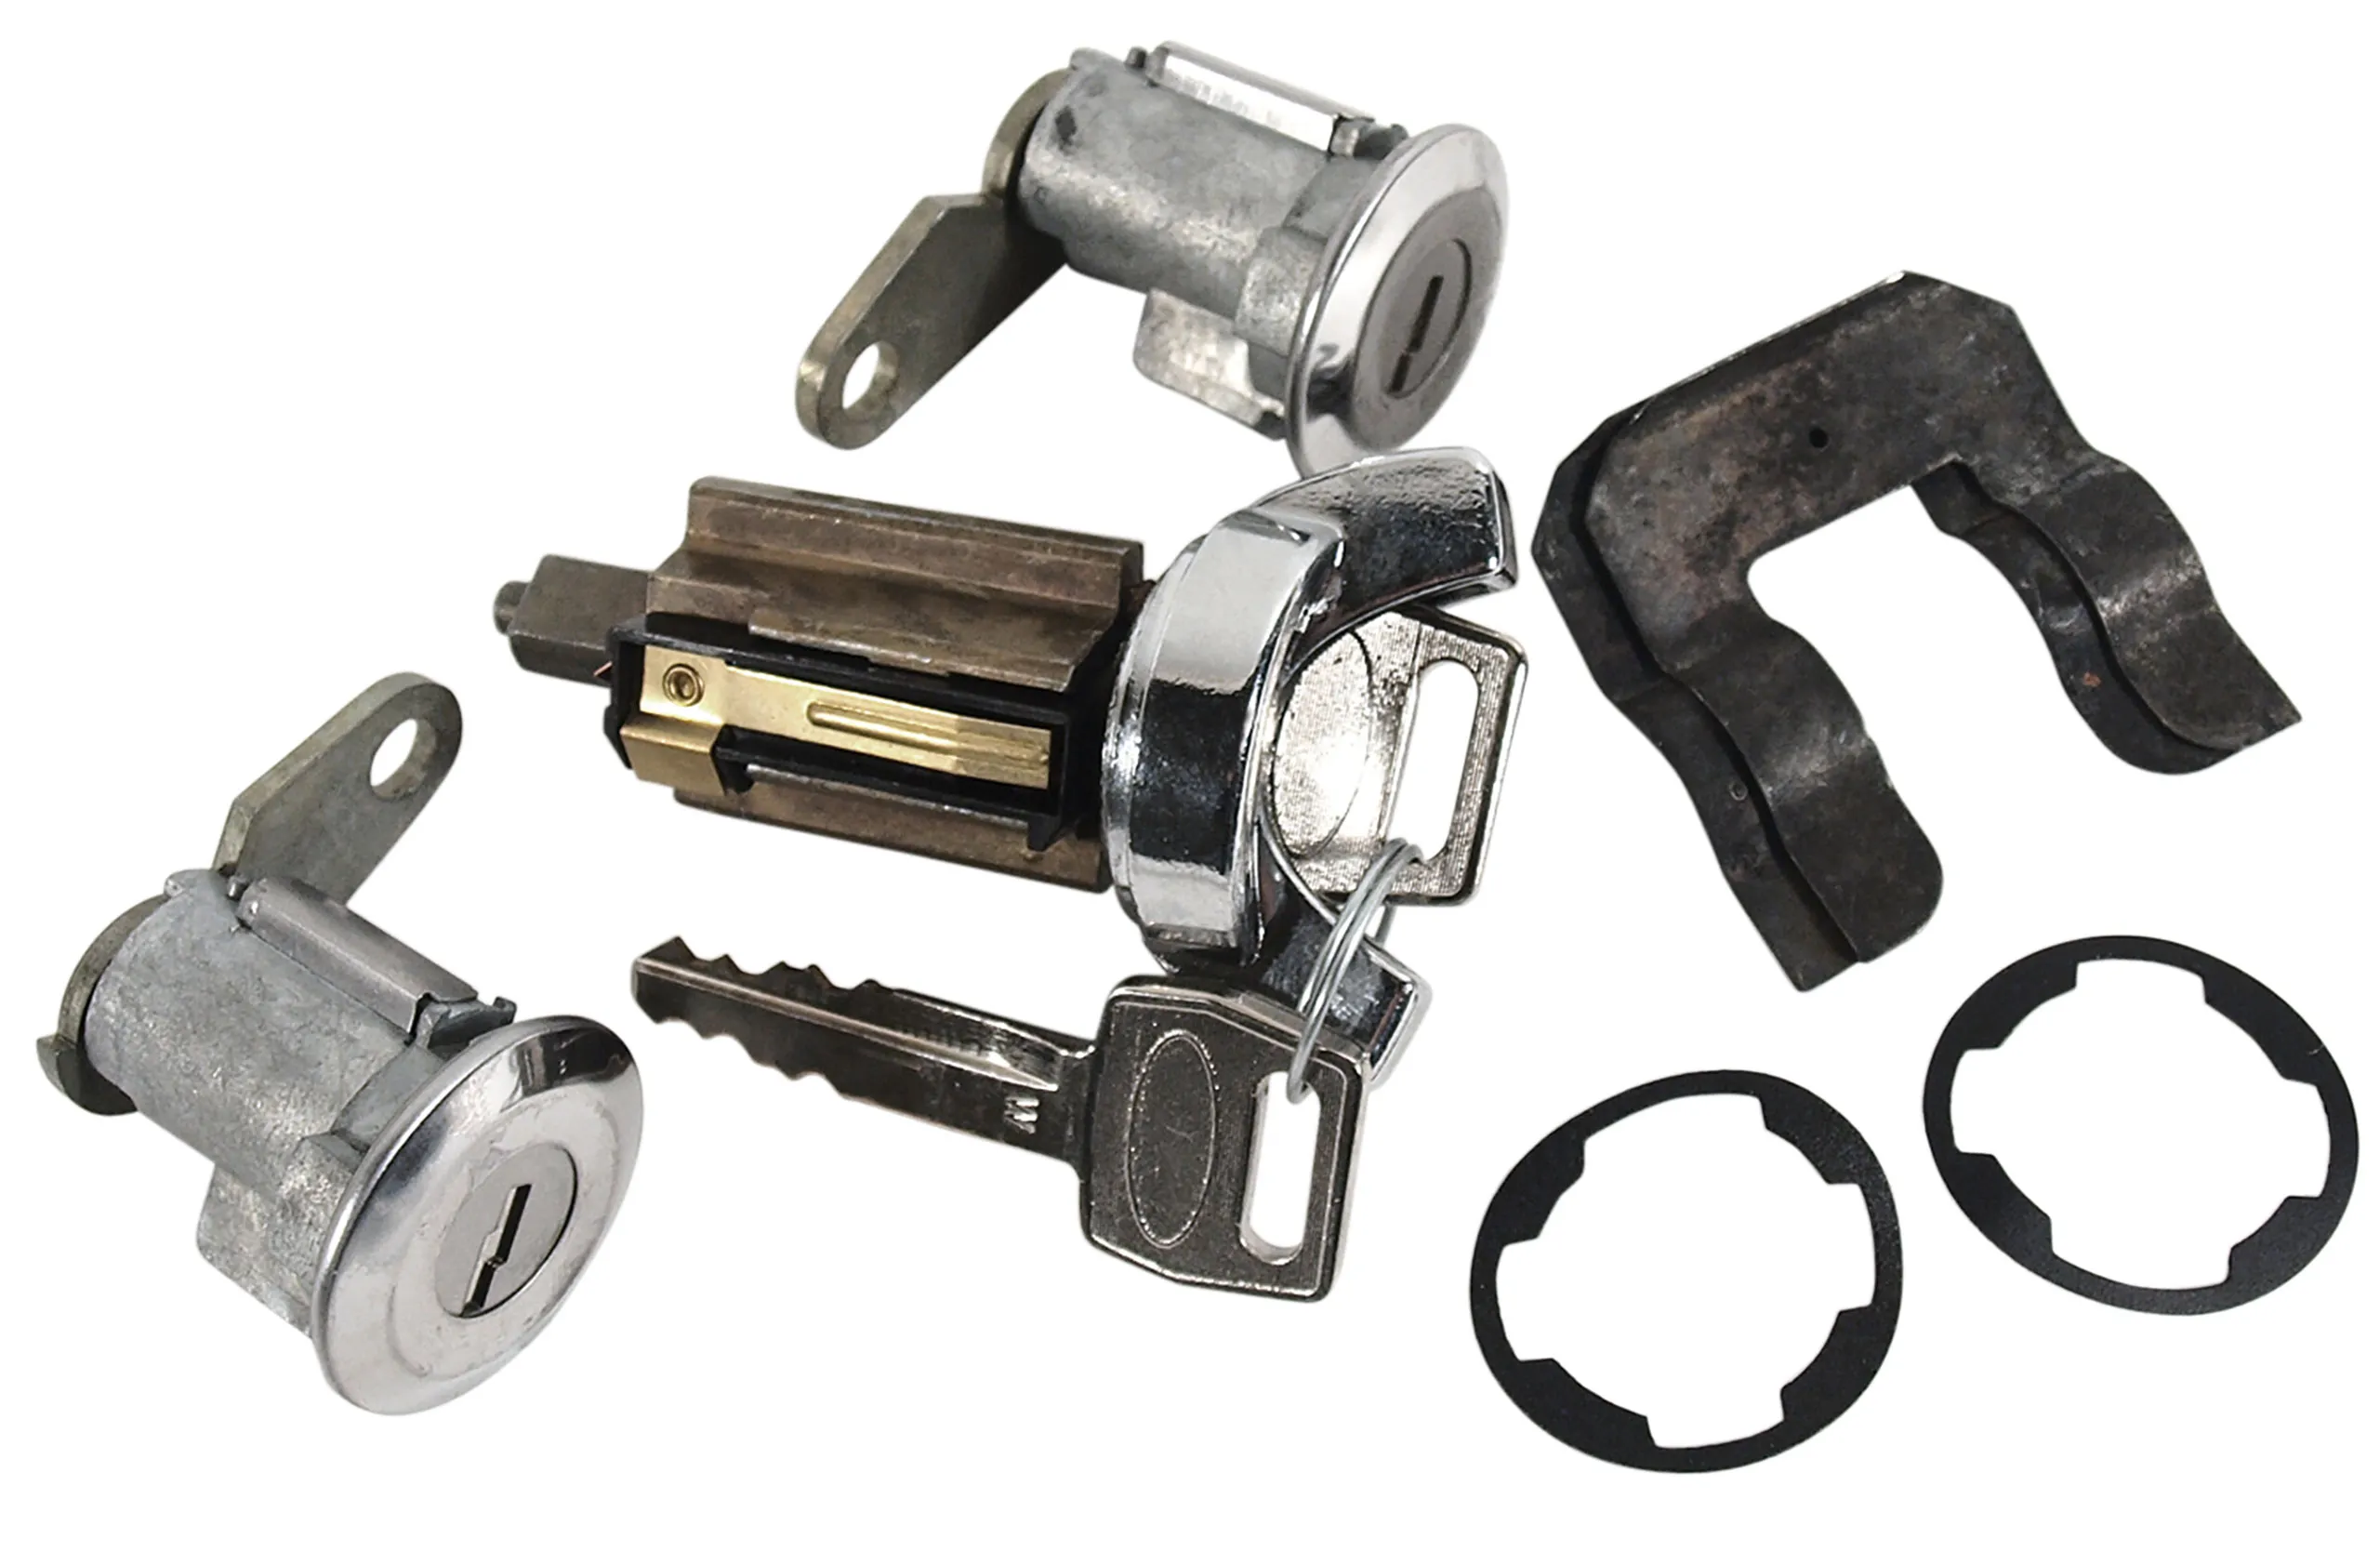 First Generation 1970-1973 Ford Mustang Ignition & Door Kits - Original (Before 5/14/73) - Auto Accessories of America